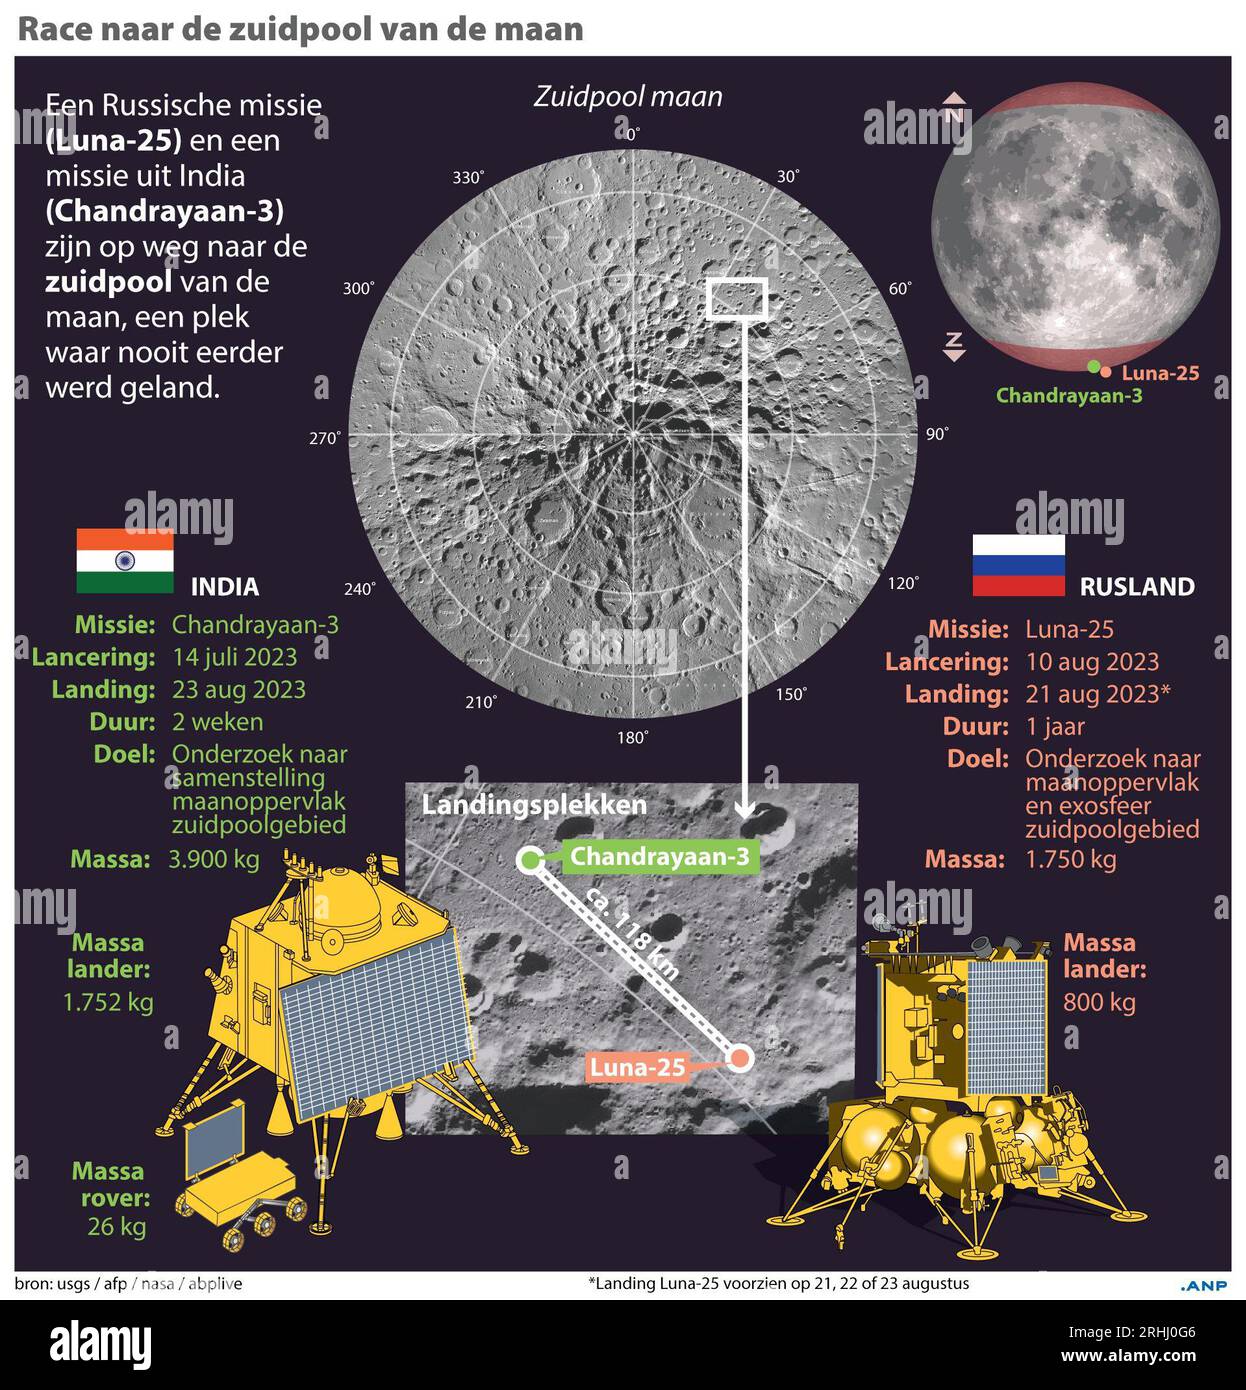 Race to the south pole of the moon, profile missions Luna-25 (Russia) and Chandrayaan-3 (India). ANP INFOGRAPHICS netherlands out - belgium out Stock Photo